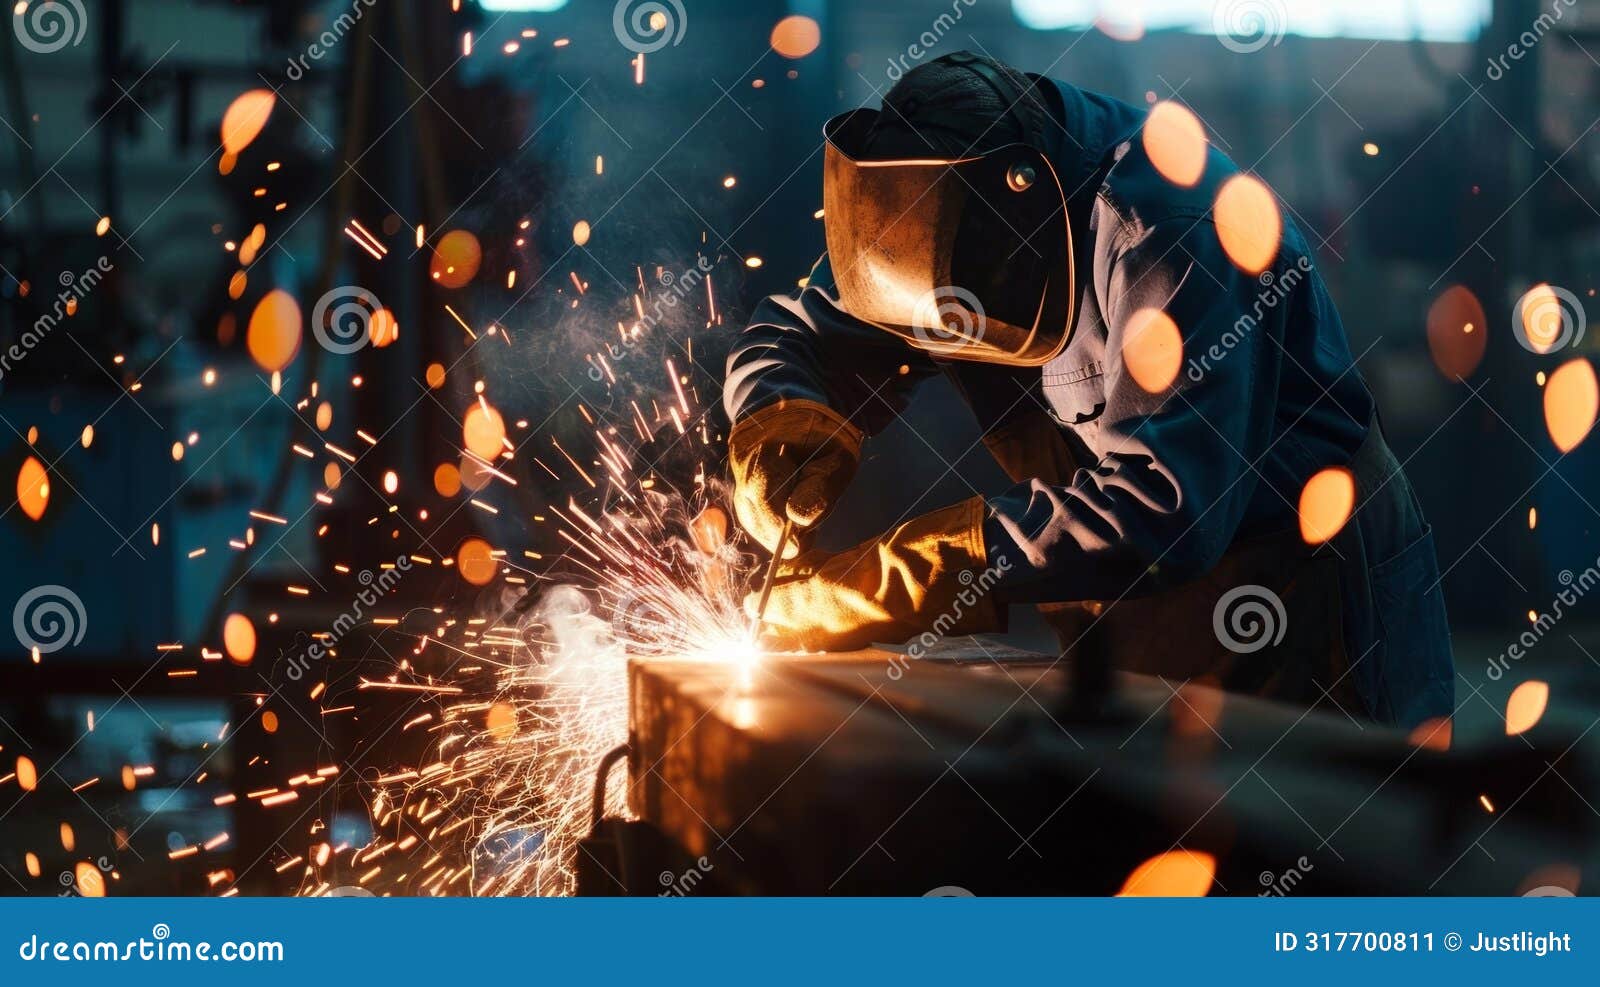 sparks fly as a worker welds together two pieces of heavy machinery carefully ensuring a secure bond